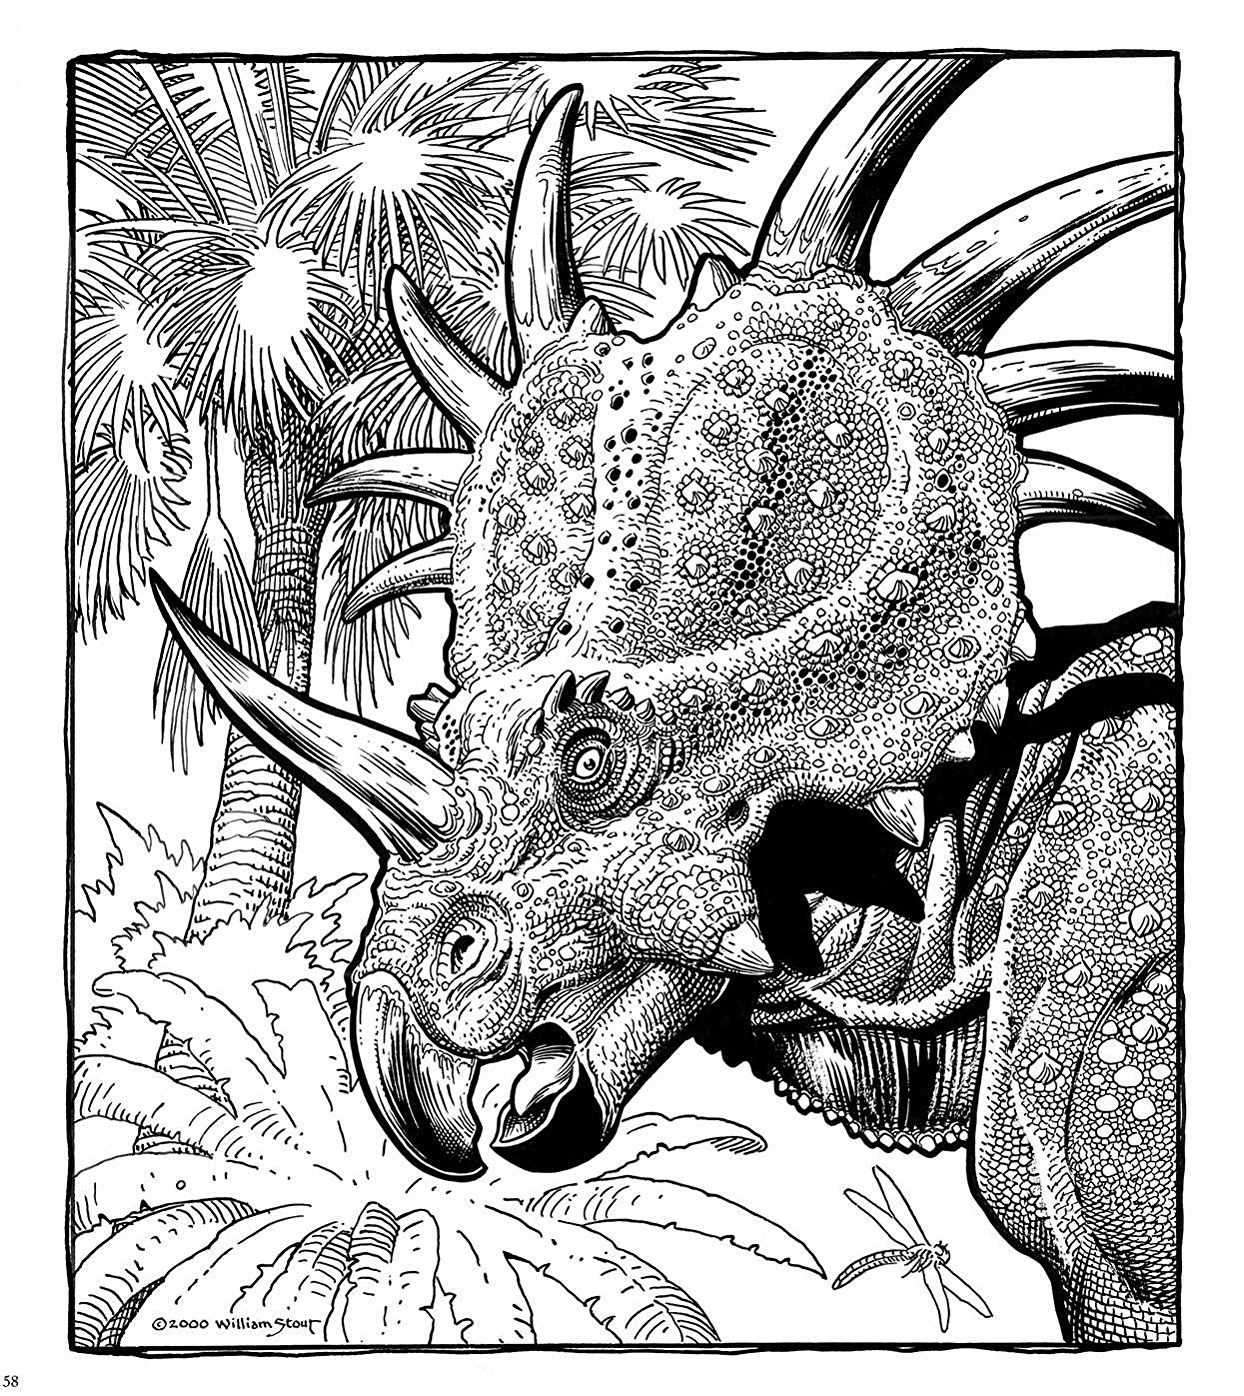 Download Image - William Stout Dinosaur coloring page Styracosaurus.png | Dinopedia | FANDOM powered by Wikia